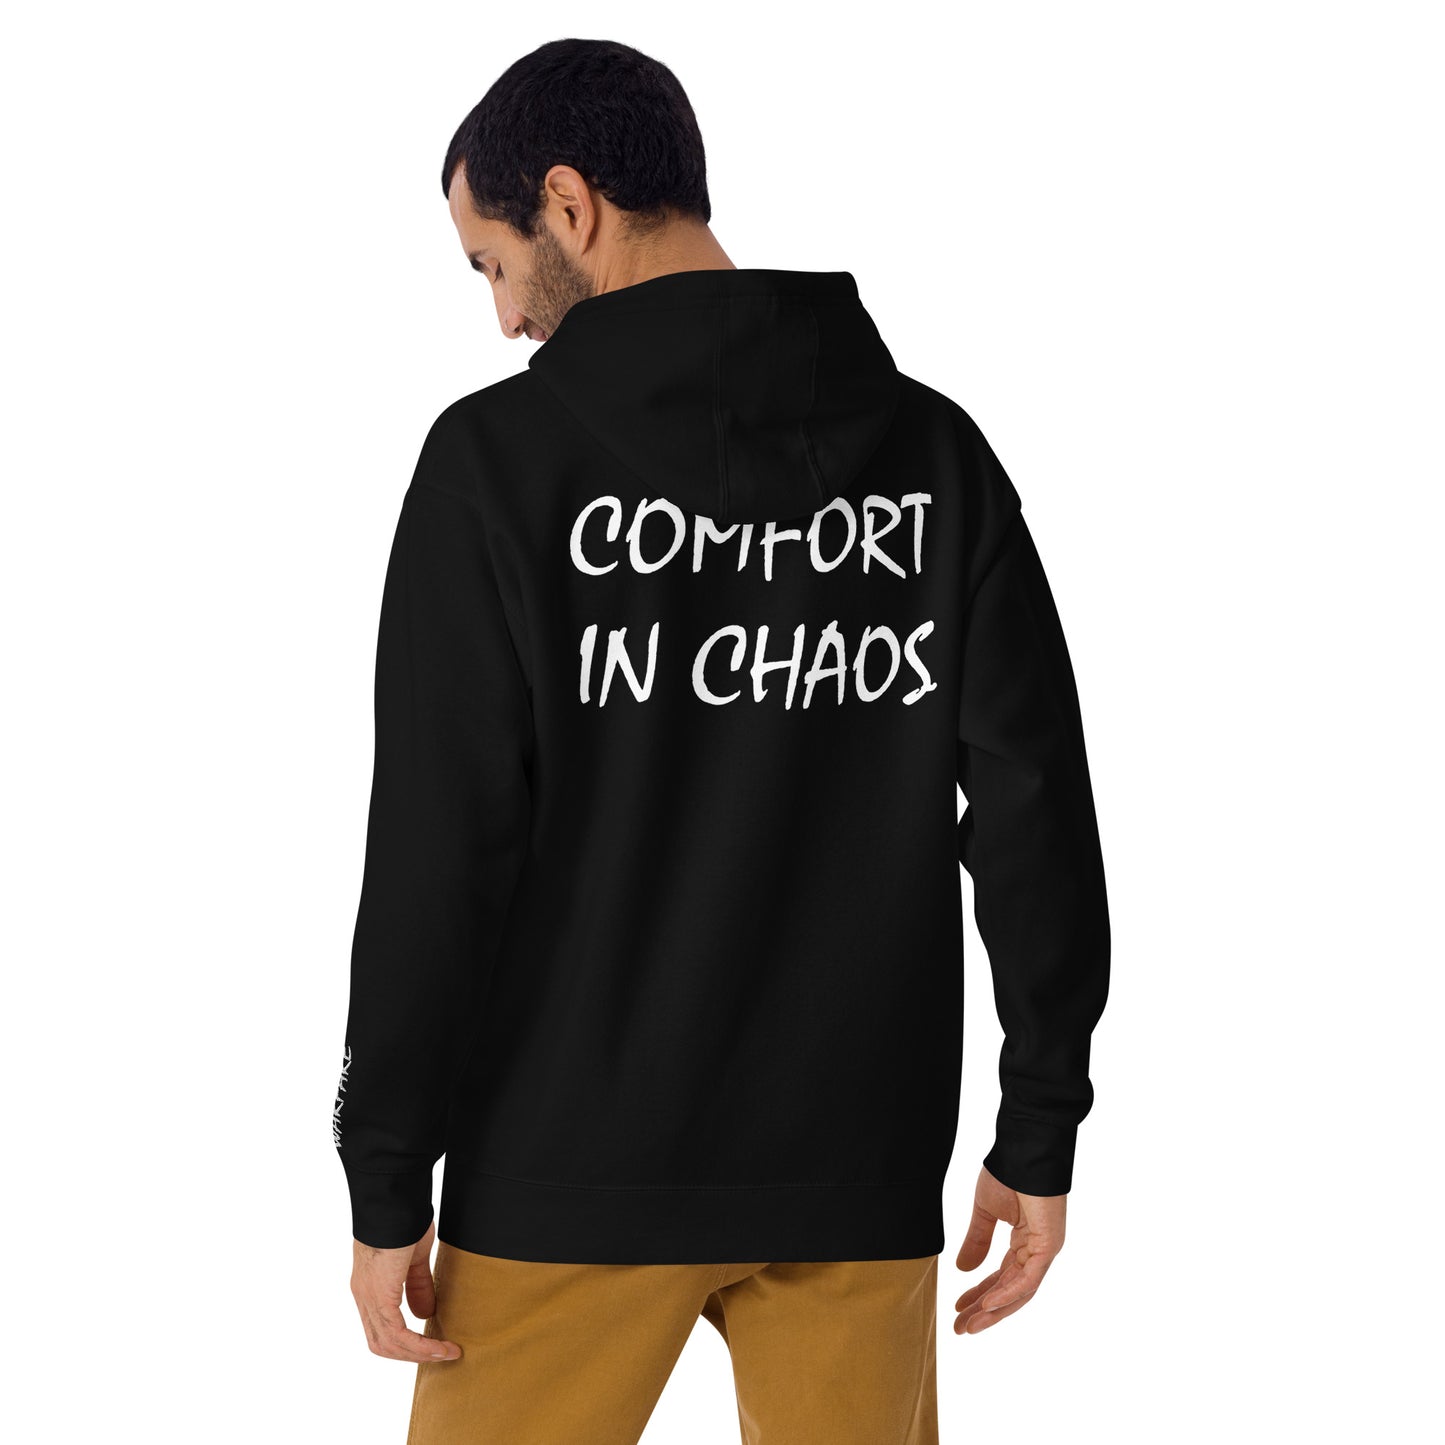 COMFOT IN CHAOS EMBROIDERED Unisex Hoodie